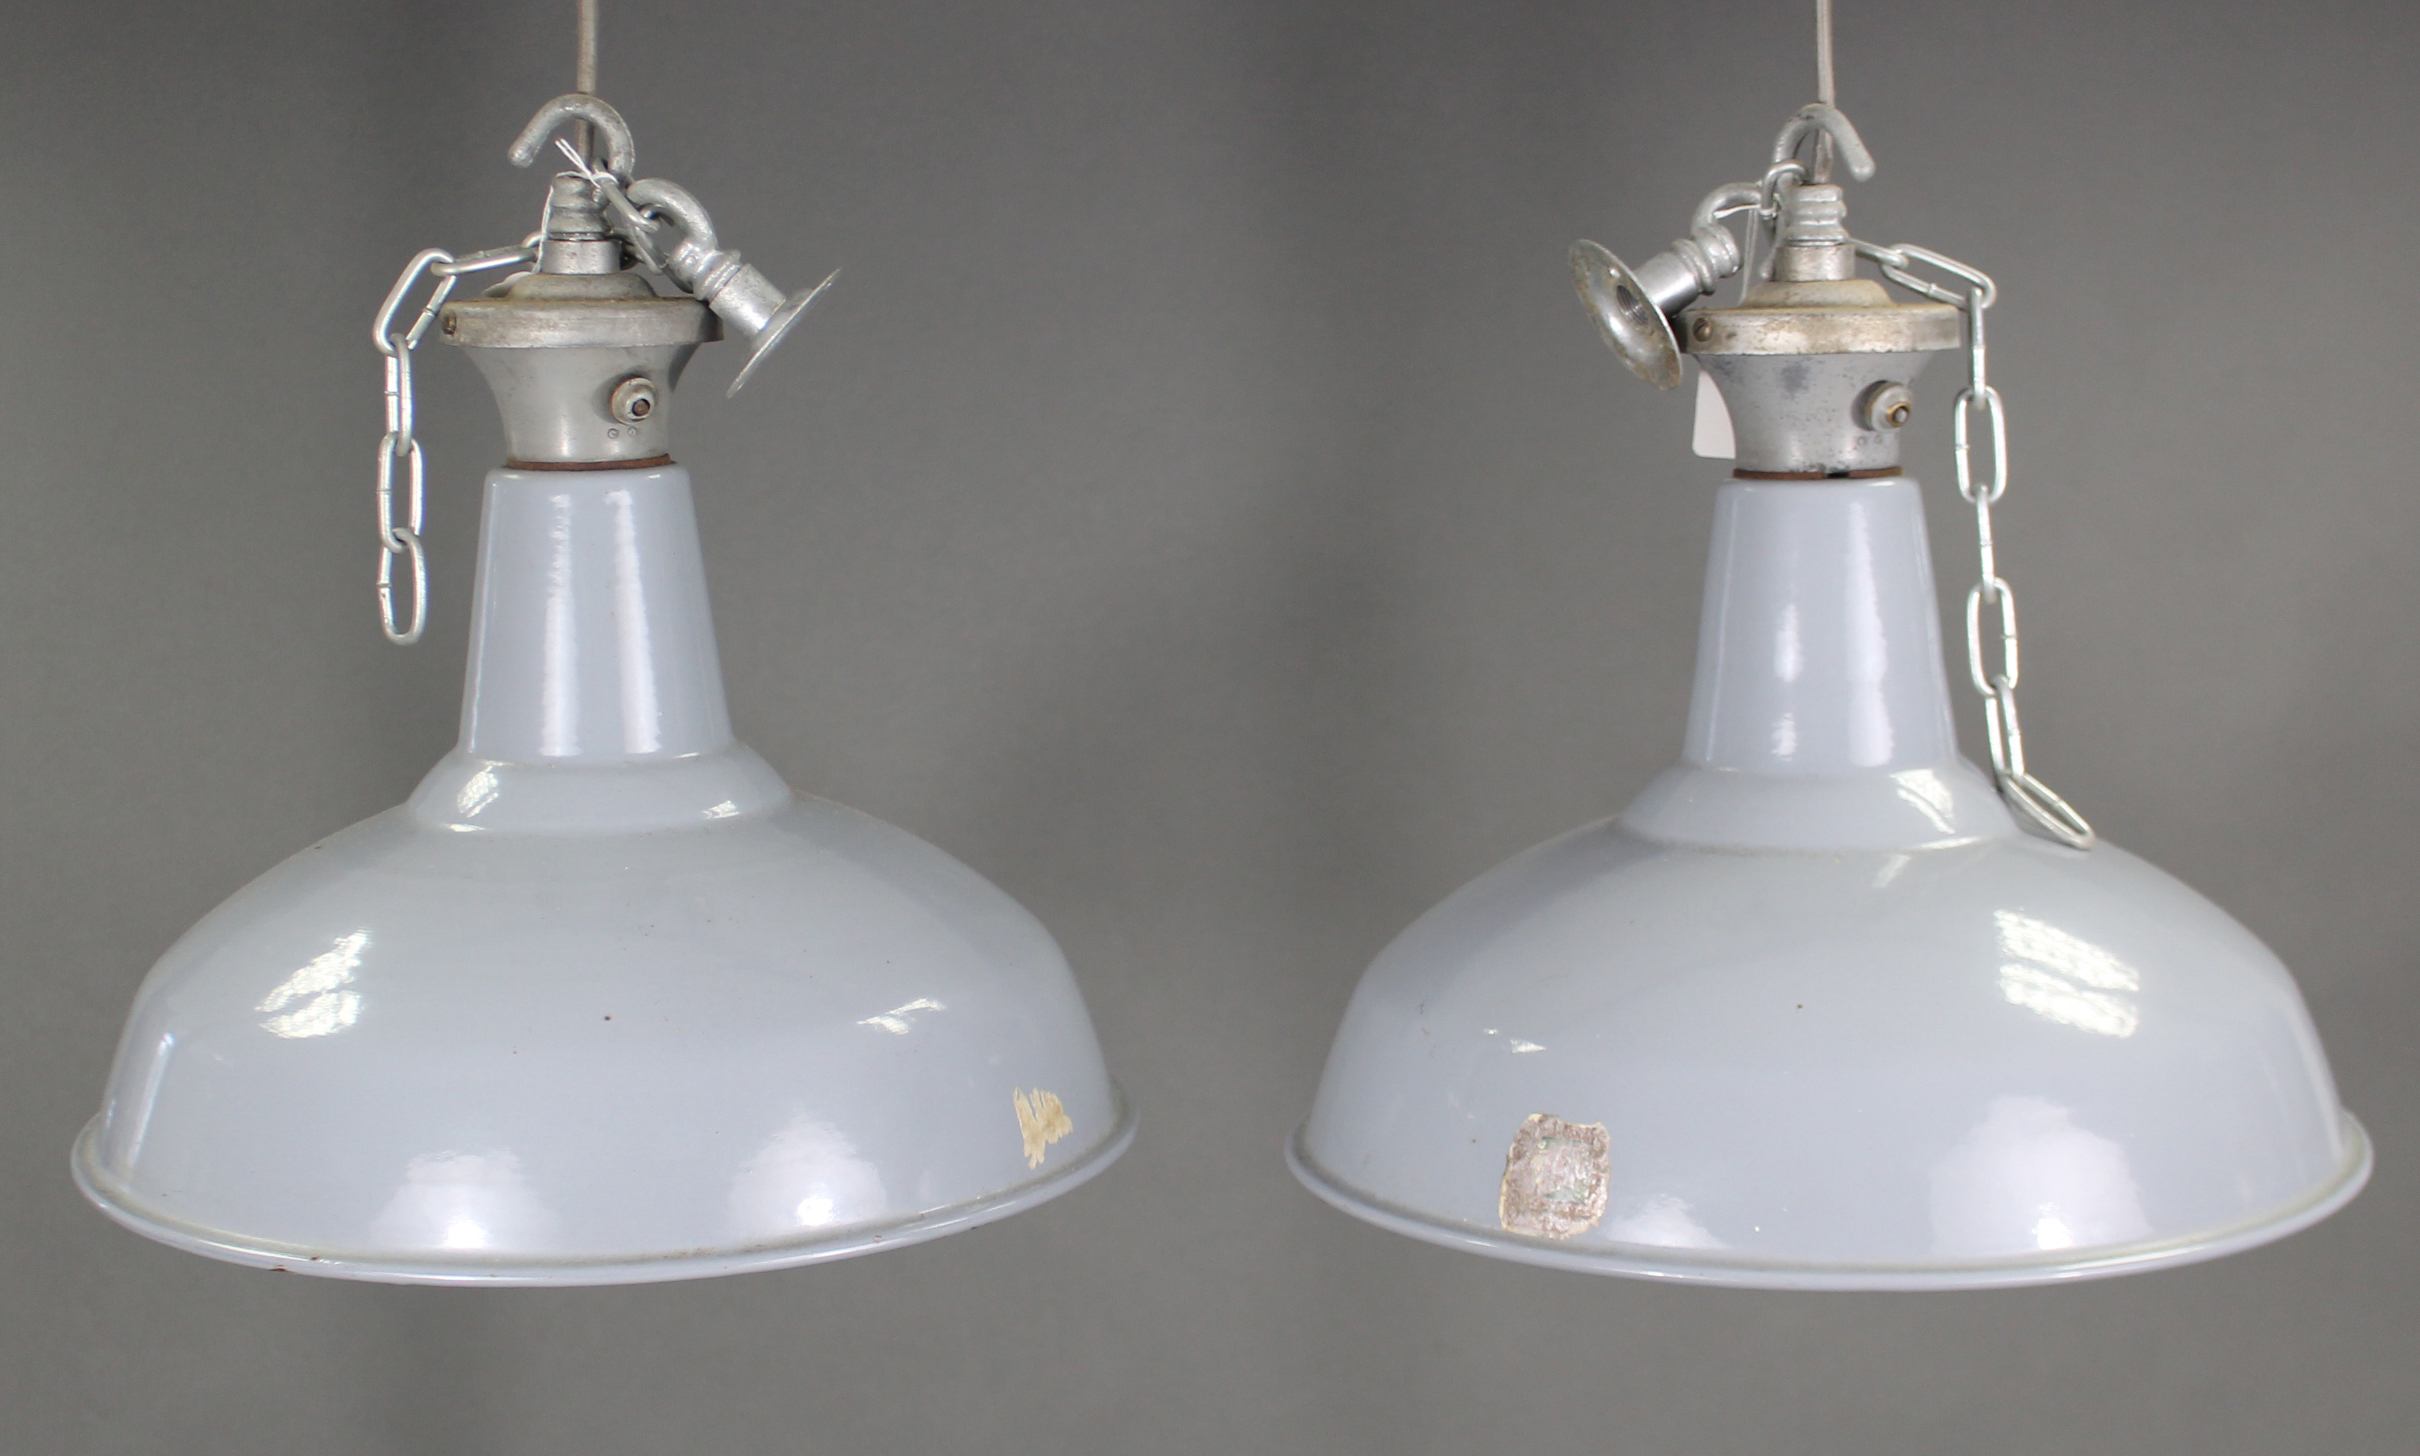 A pair of mid-20th century Benjamin industrial pendant ceiling lights with blue/grey enamel